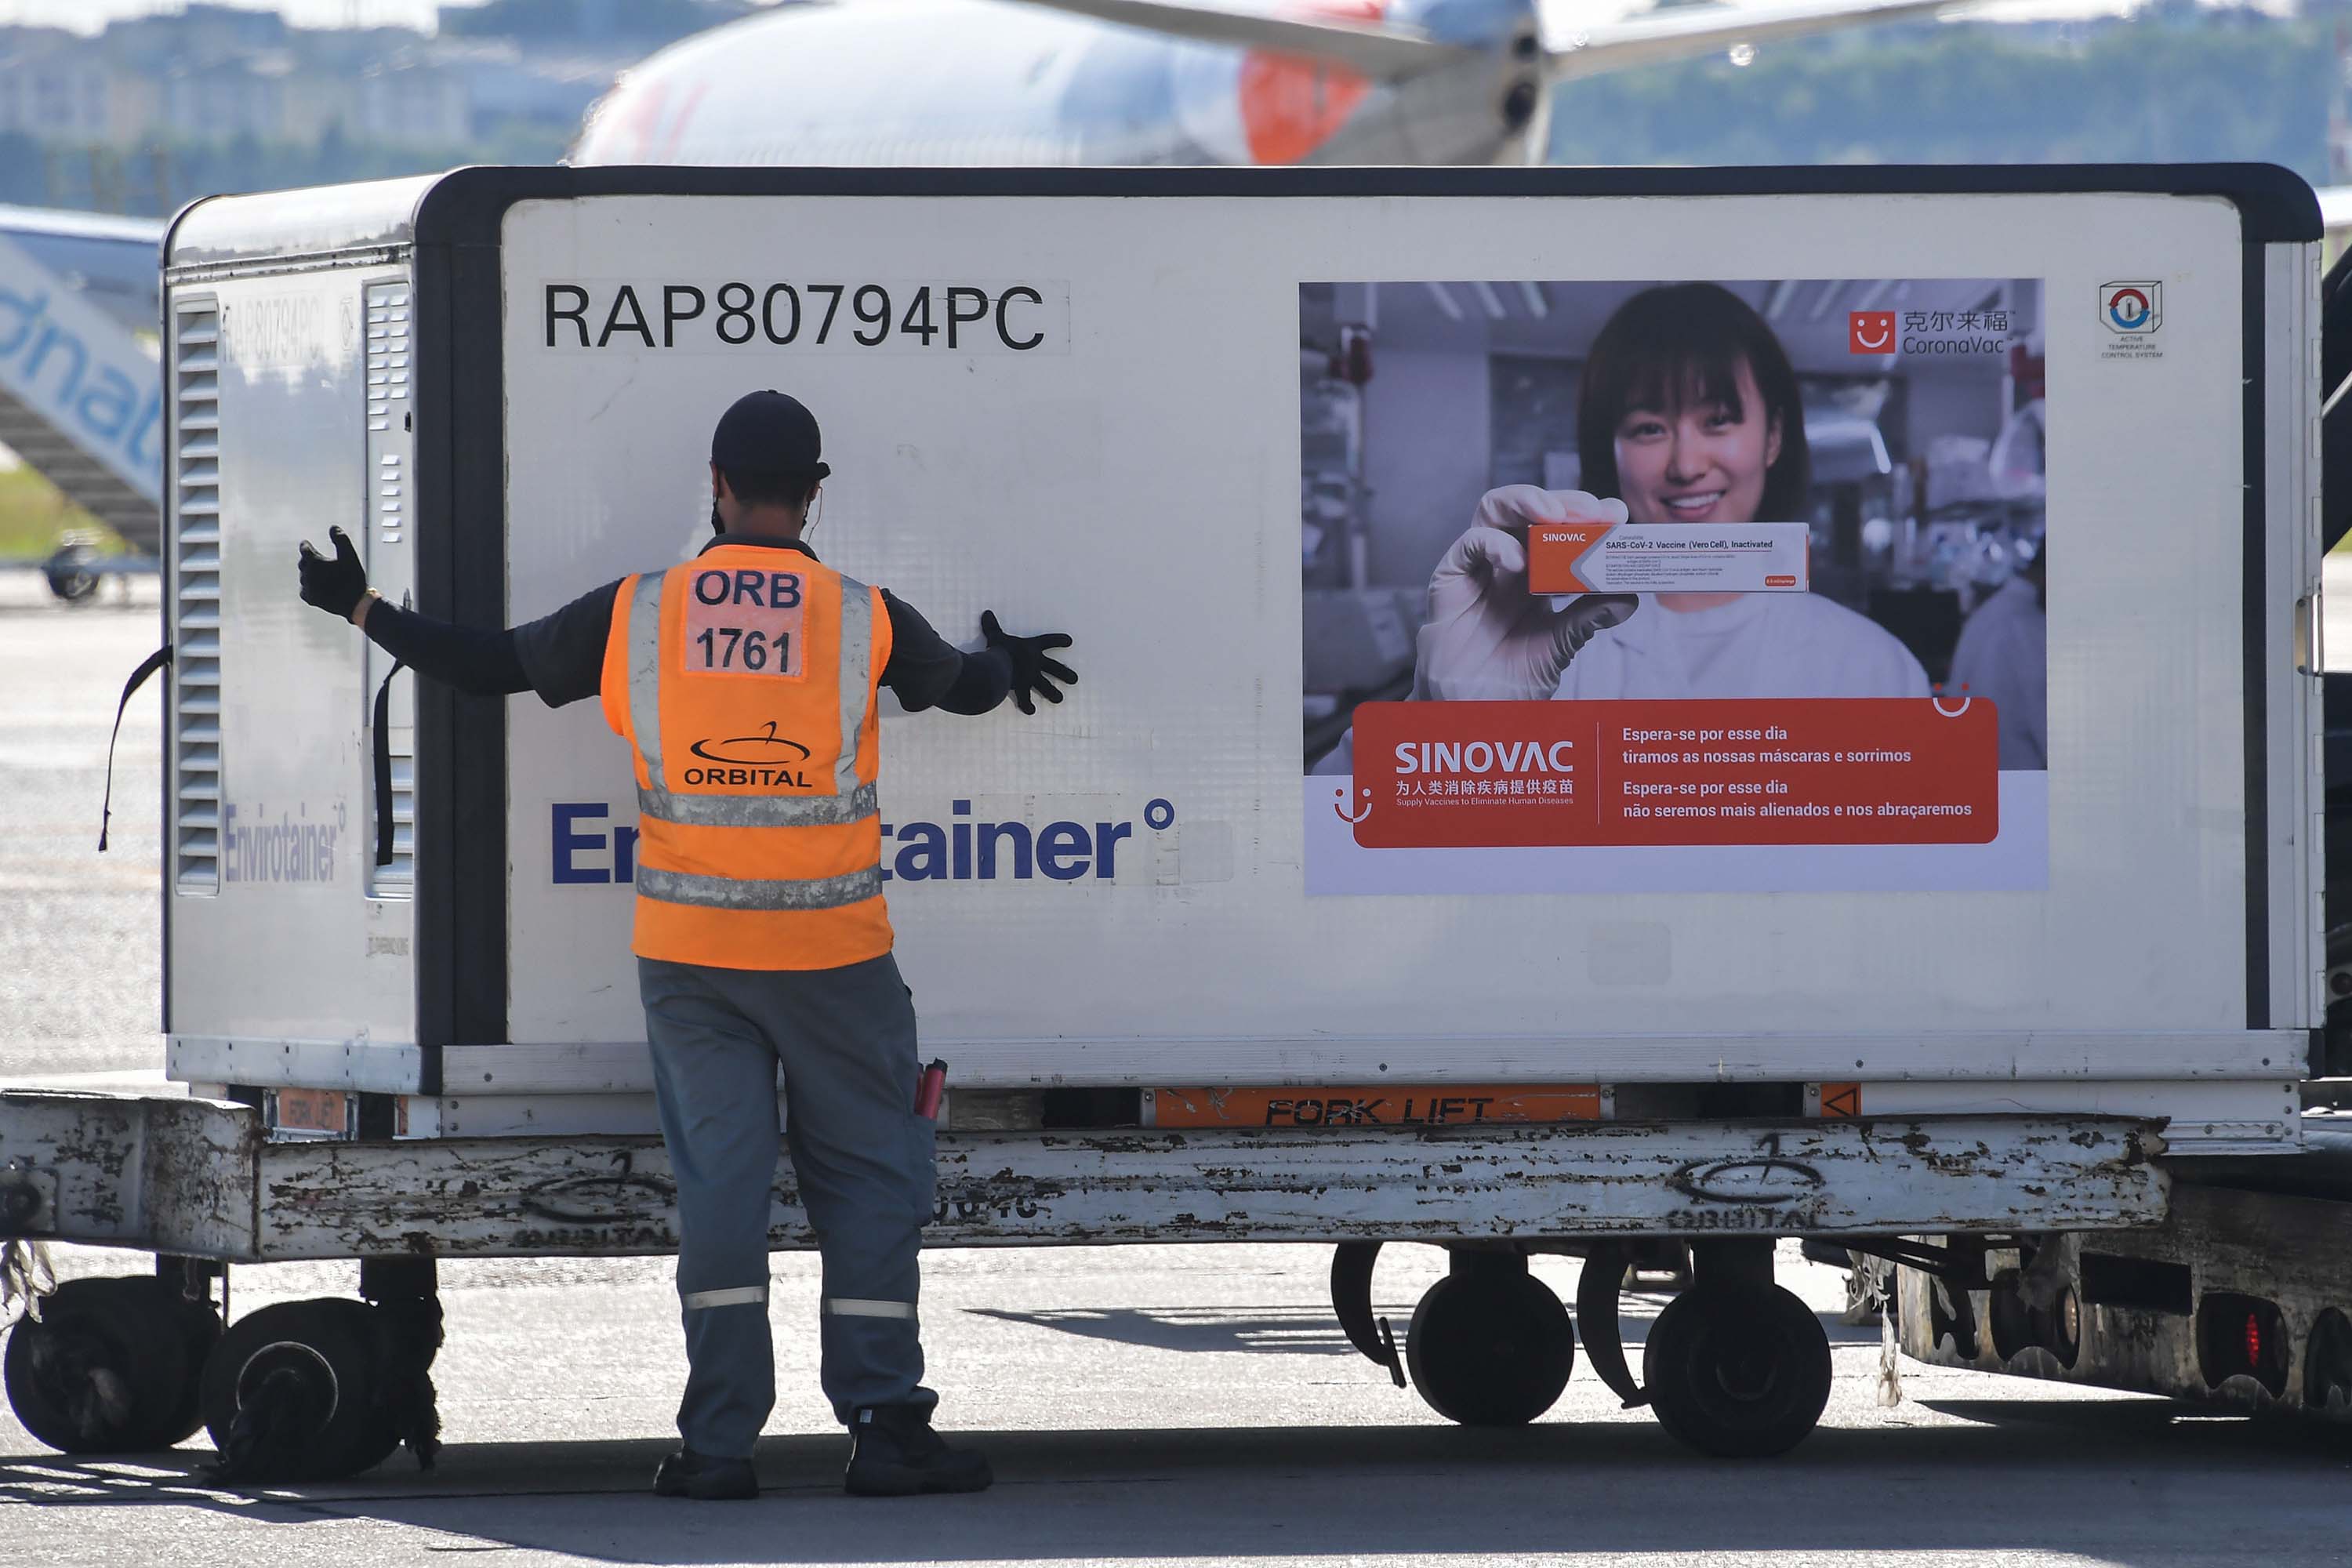 A shipment of the CoronaVac vaccine is unloaded from a cargo plane that arrived from China, at Guarulhos International Airport in Guarulhos, Brazil, on December 18.